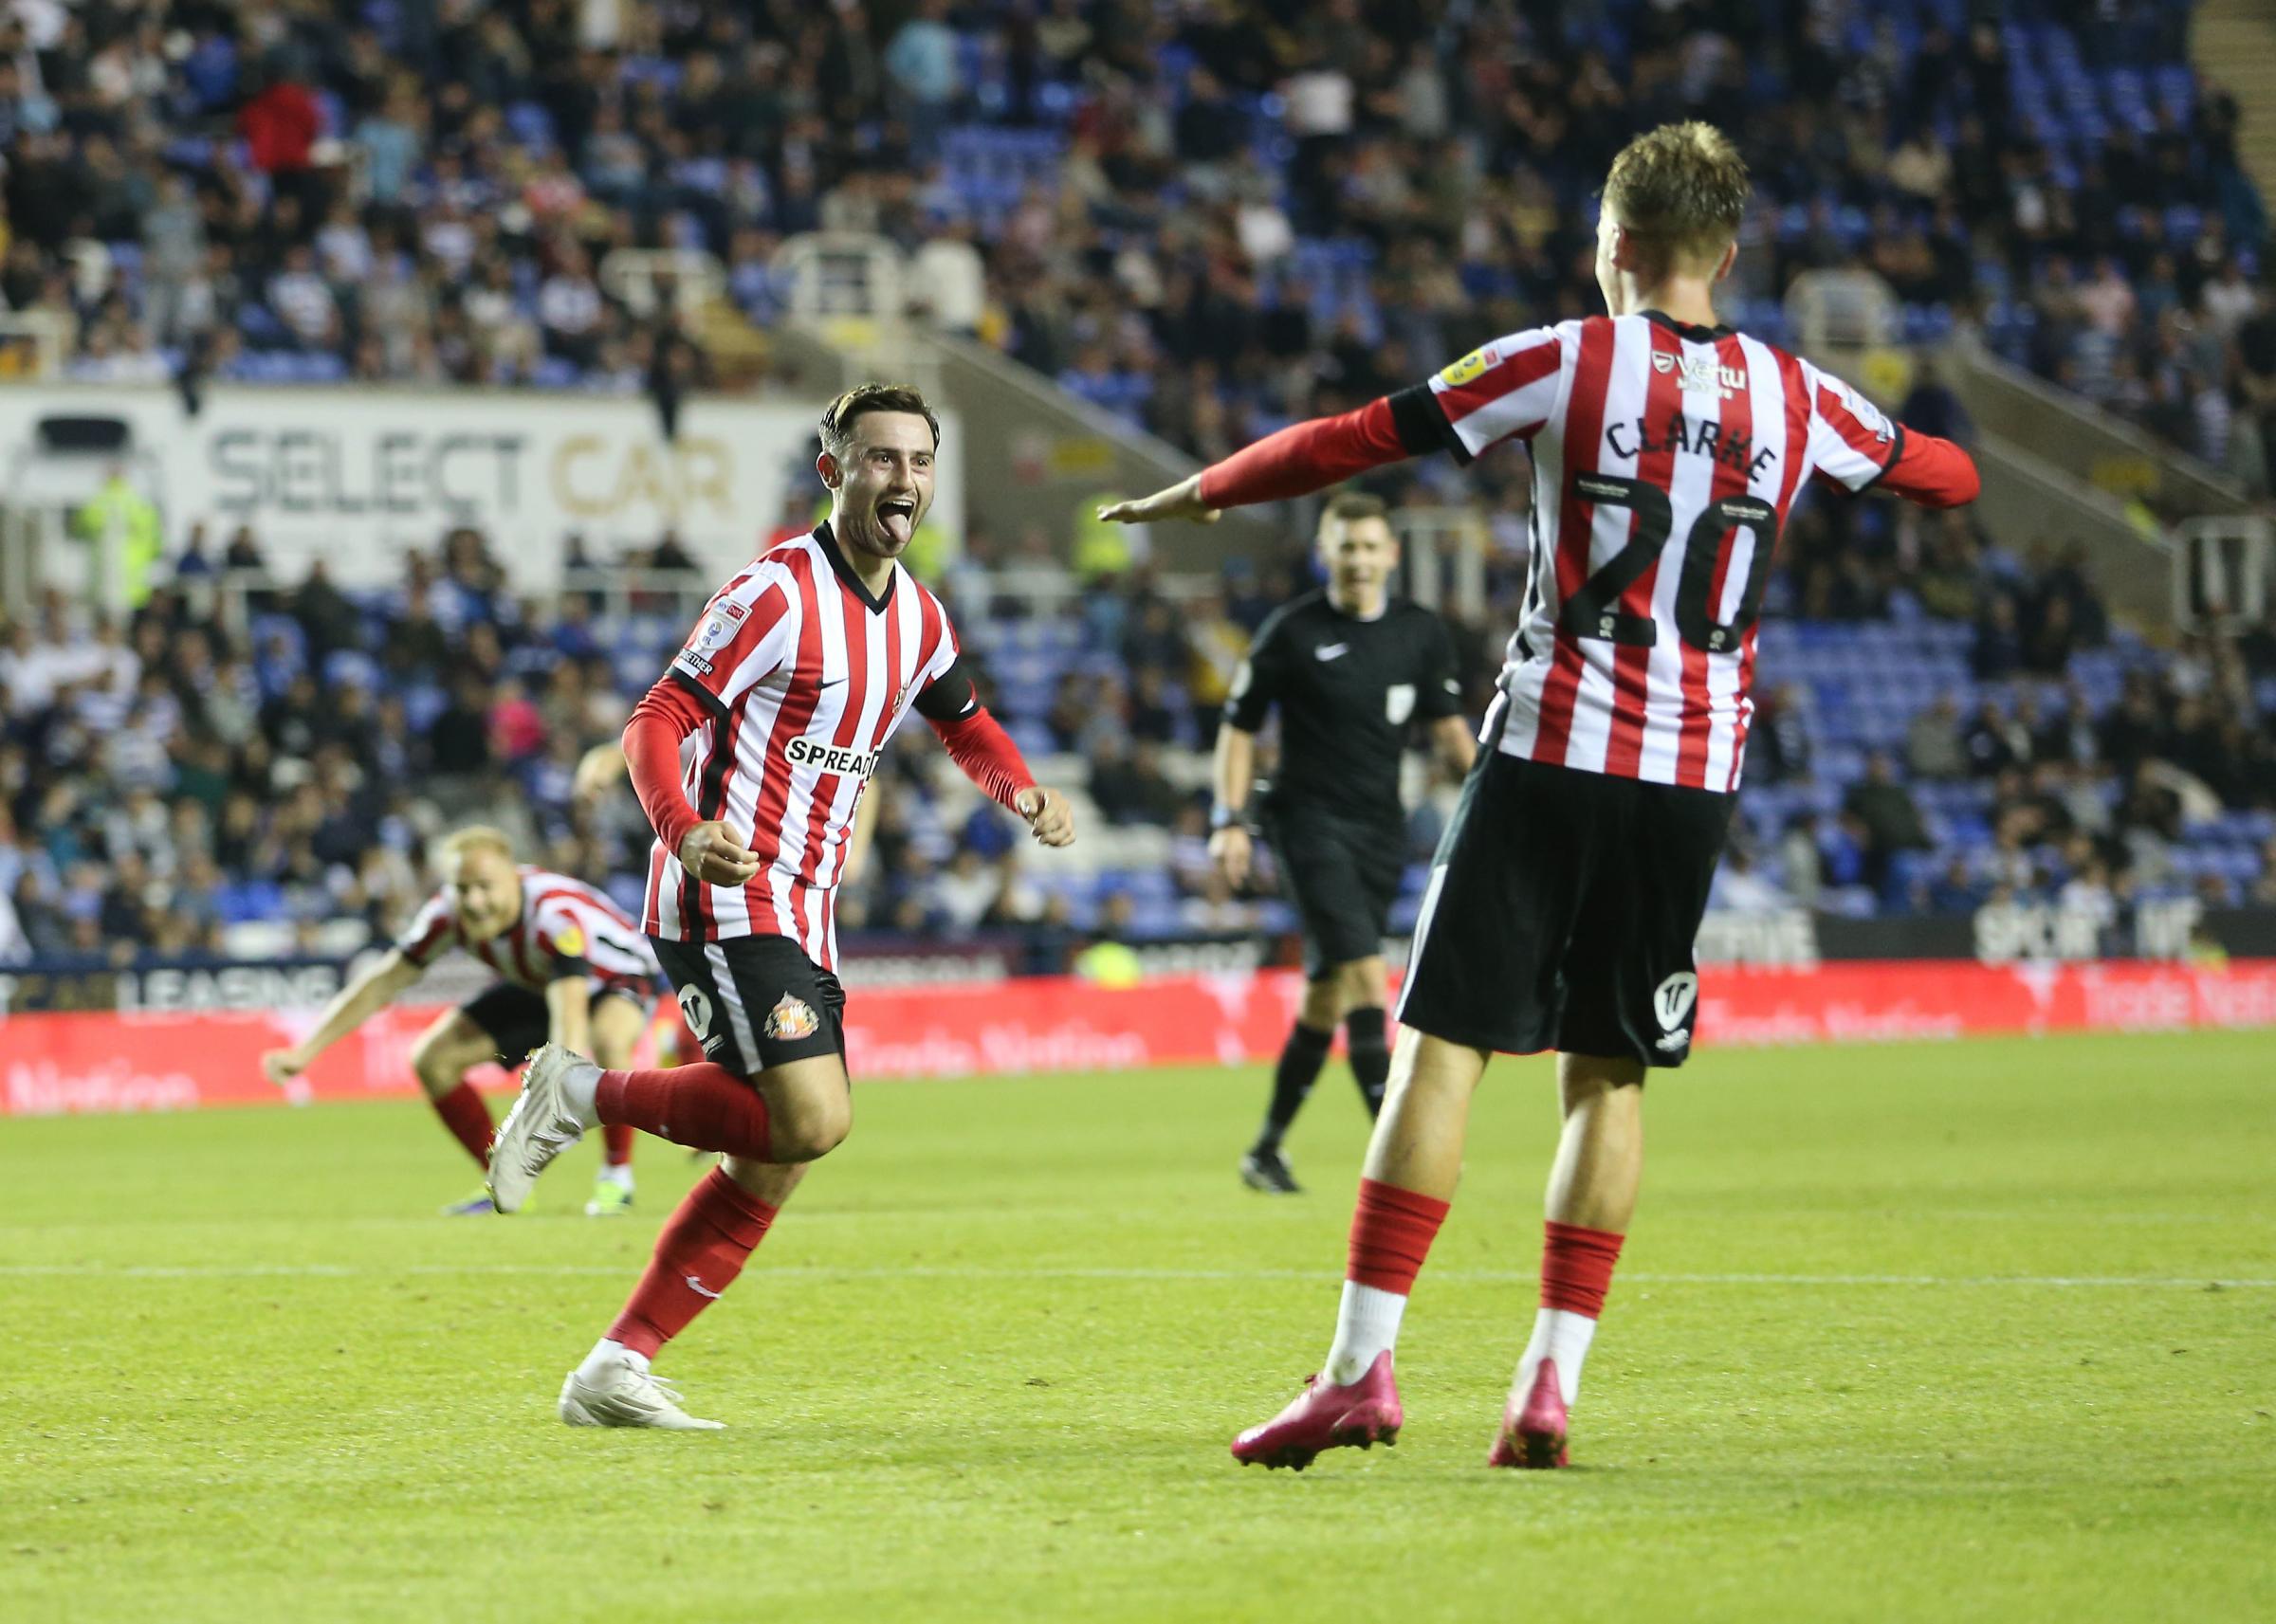 Sunderland winger Patrick Roberts nominated for Championship Player of the Month